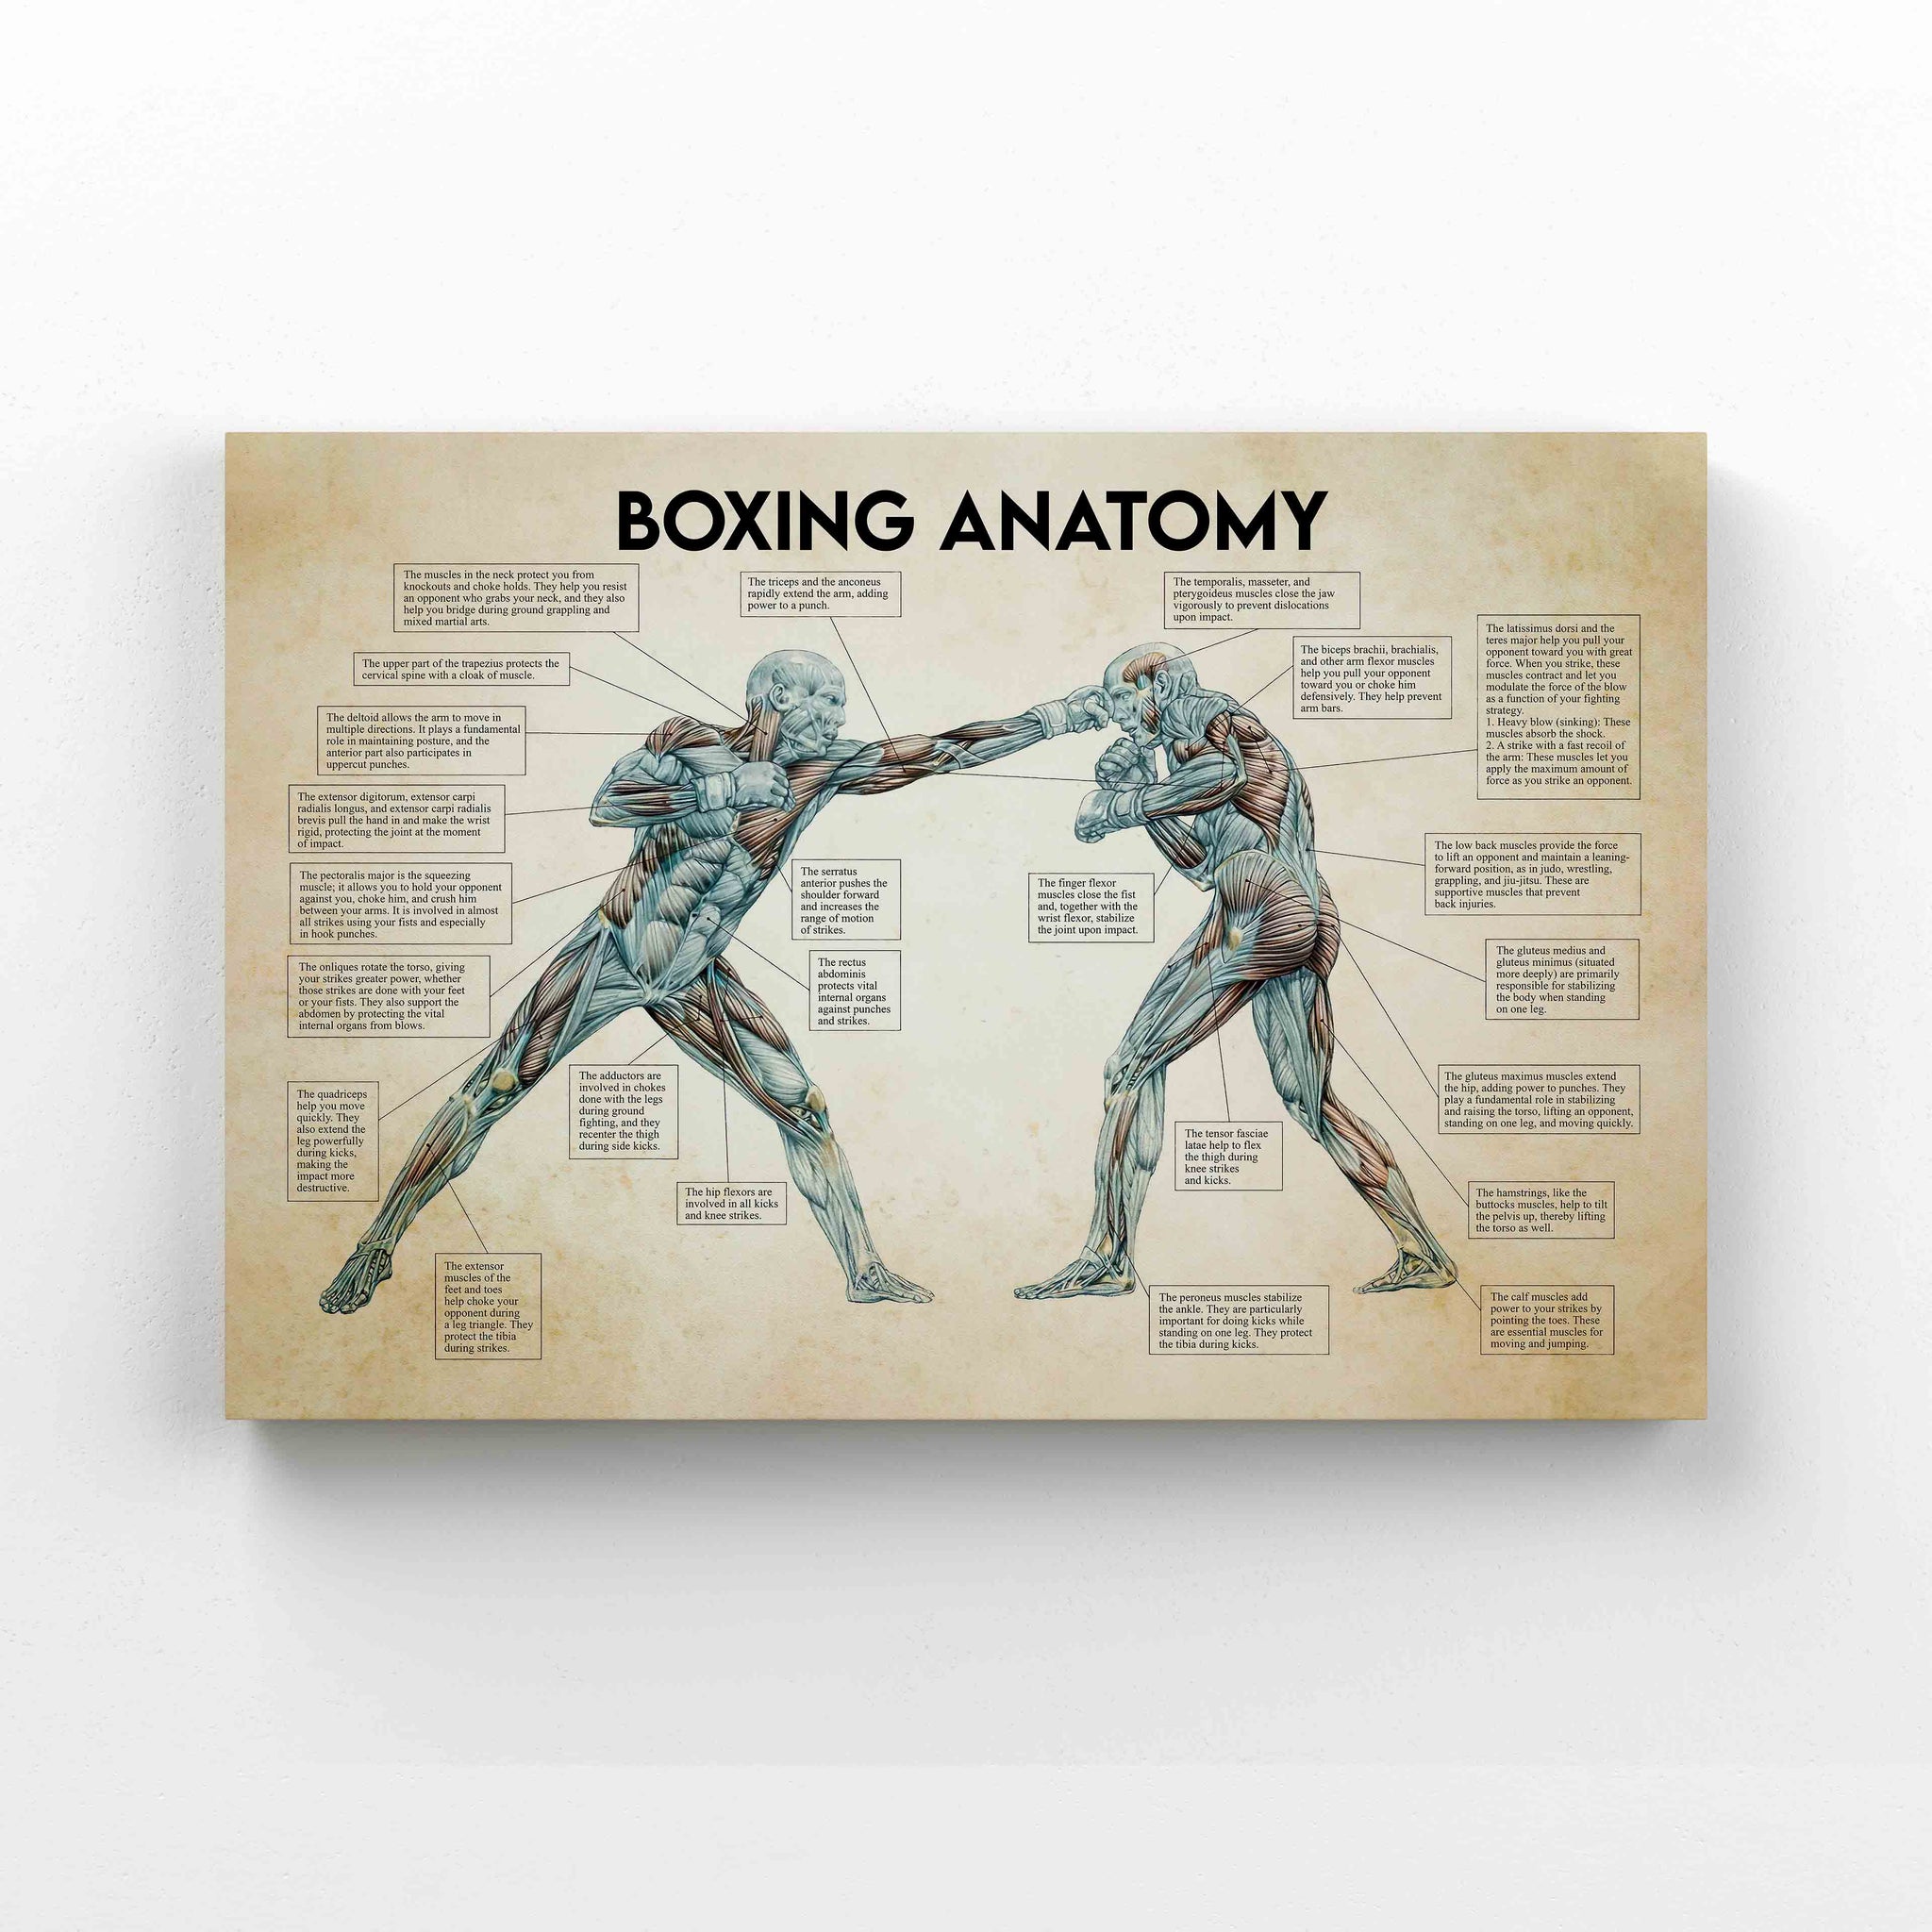 Boxing Anatomy Canvas, Boxing Canvas, Knowledge Canvas, Wall Art Canvas, Gift Canvas